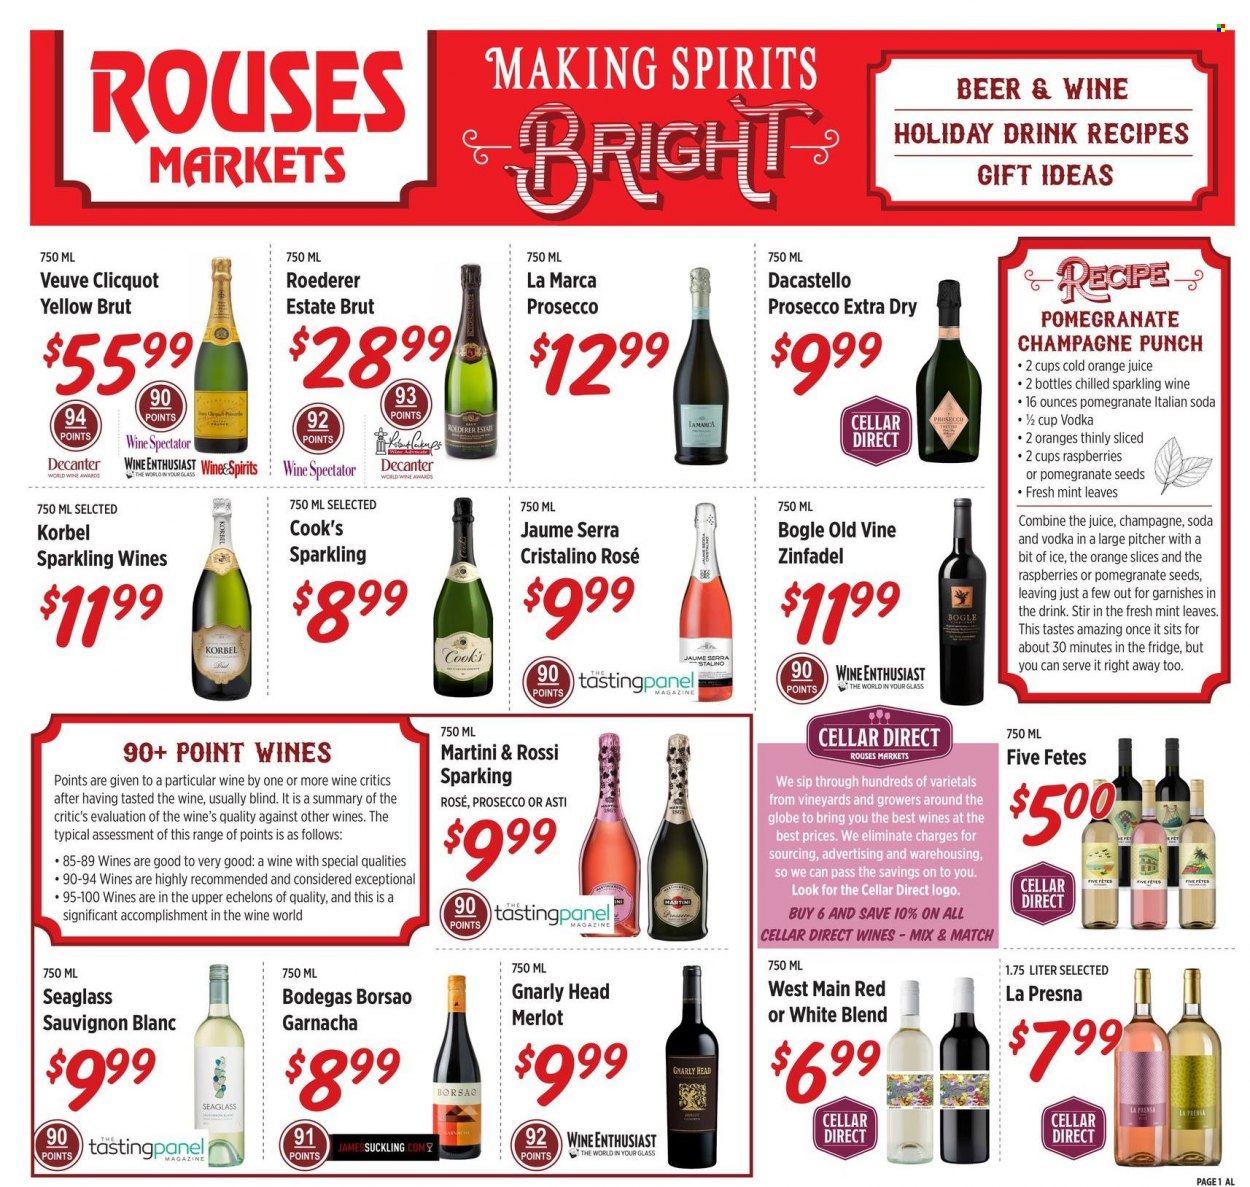 thumbnail - Rouses Markets Flyer - 12/01/2021 - 12/29/2021 - Sales products - Cook's, juice, soda, red wine, sparkling wine, white wine, champagne, prosecco, wine, Merlot, Veuve Clicquot, Sauvignon Blanc, rosé wine, vodka, punch, Martini, beer. Page 1.